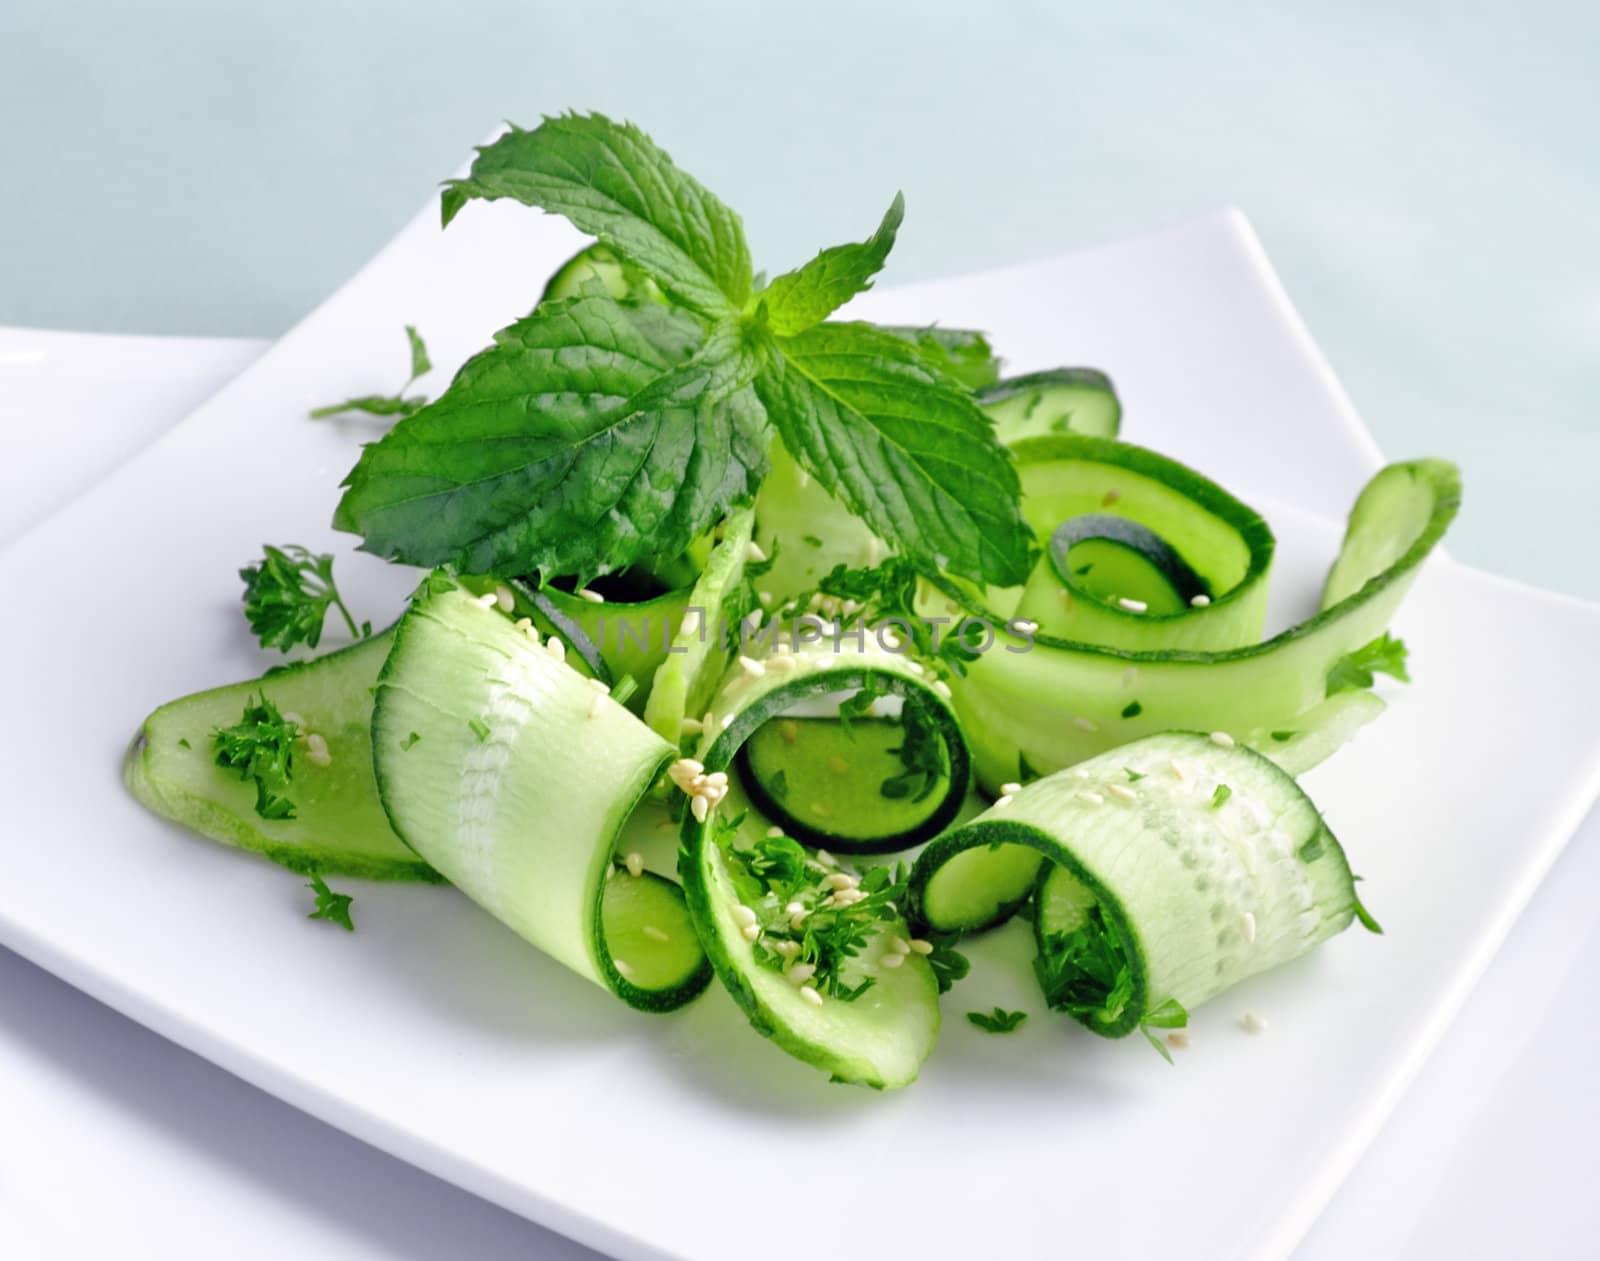 Salad of sliced green cucumbers with herbs and sesame seeds with mint leaves